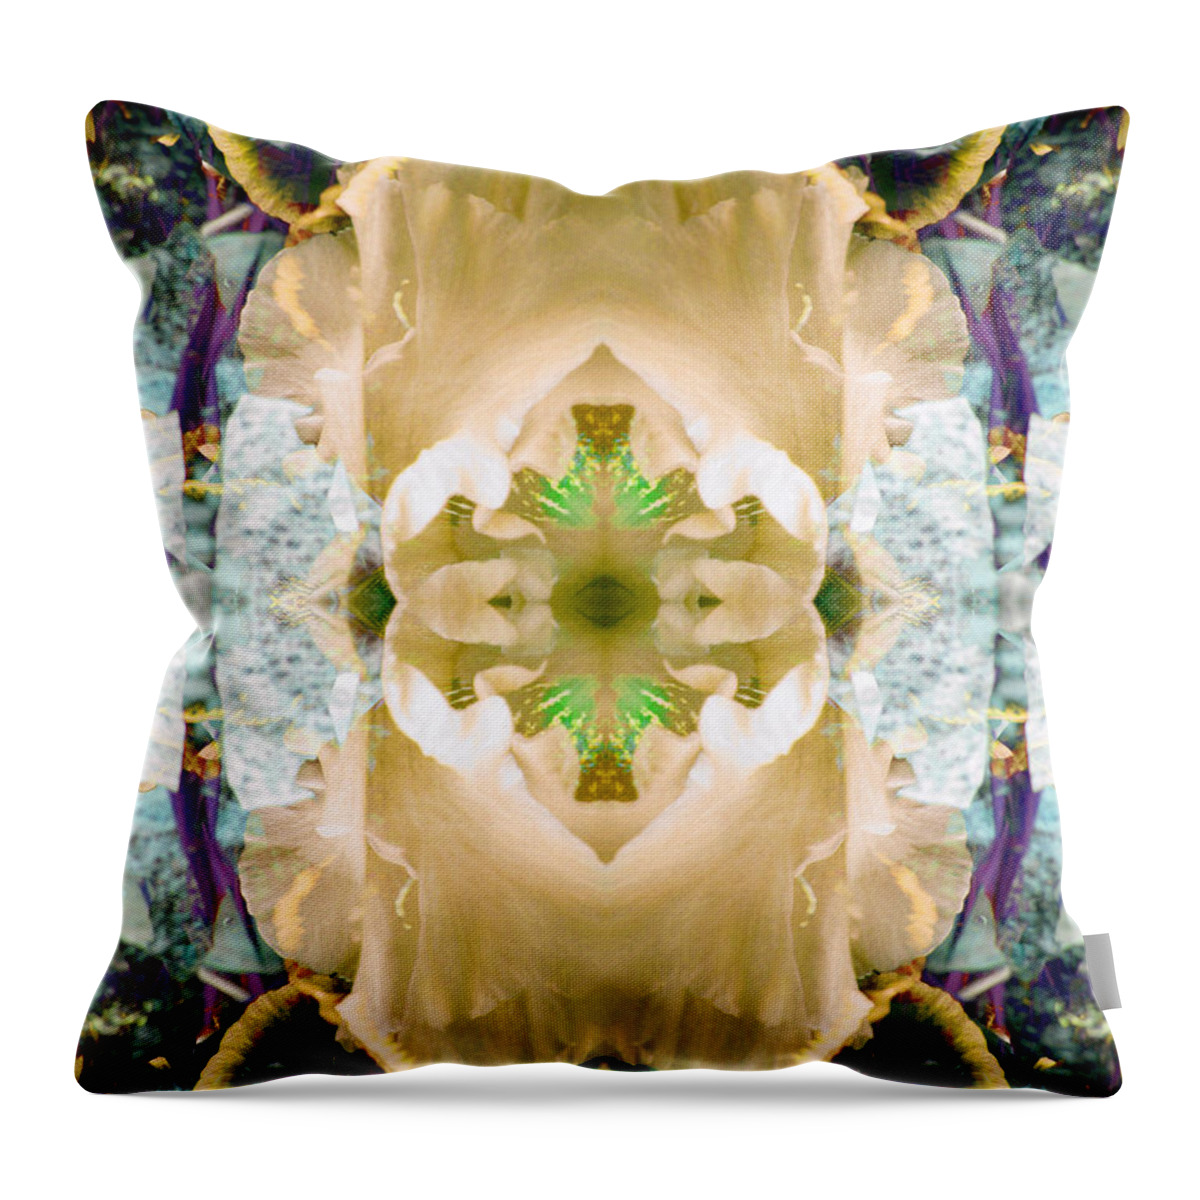 Digital Throw Pillow featuring the digital art Floral_0053_2 by Alex W McDonell